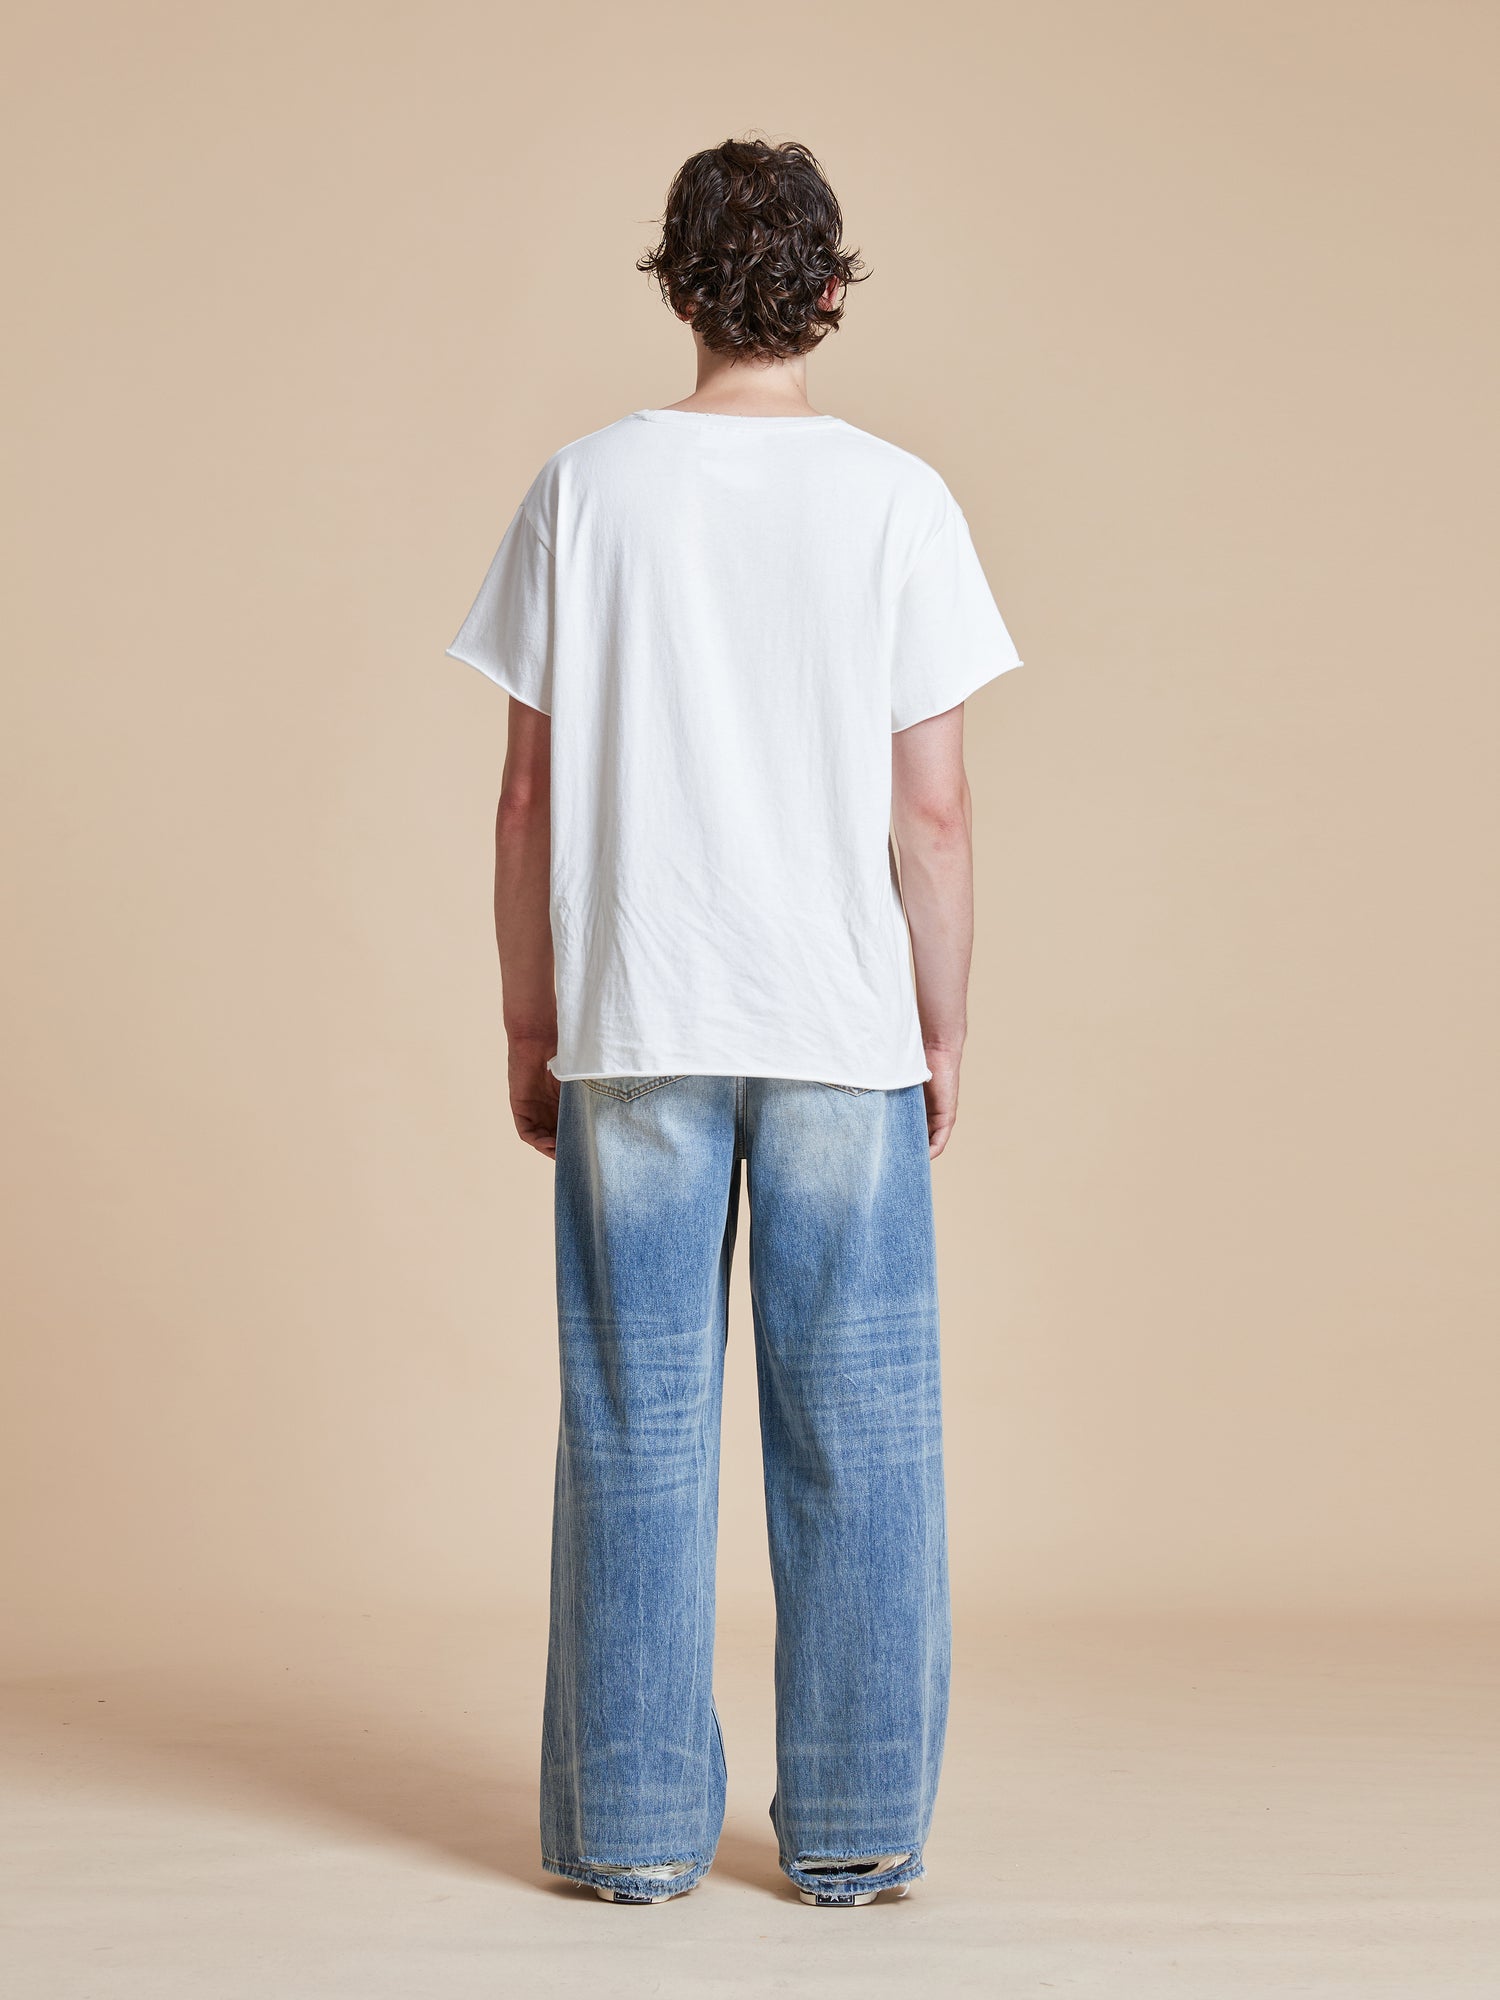 The back of a man wearing Found Lacy Baggy Jeans Blue and a white t - shirt.